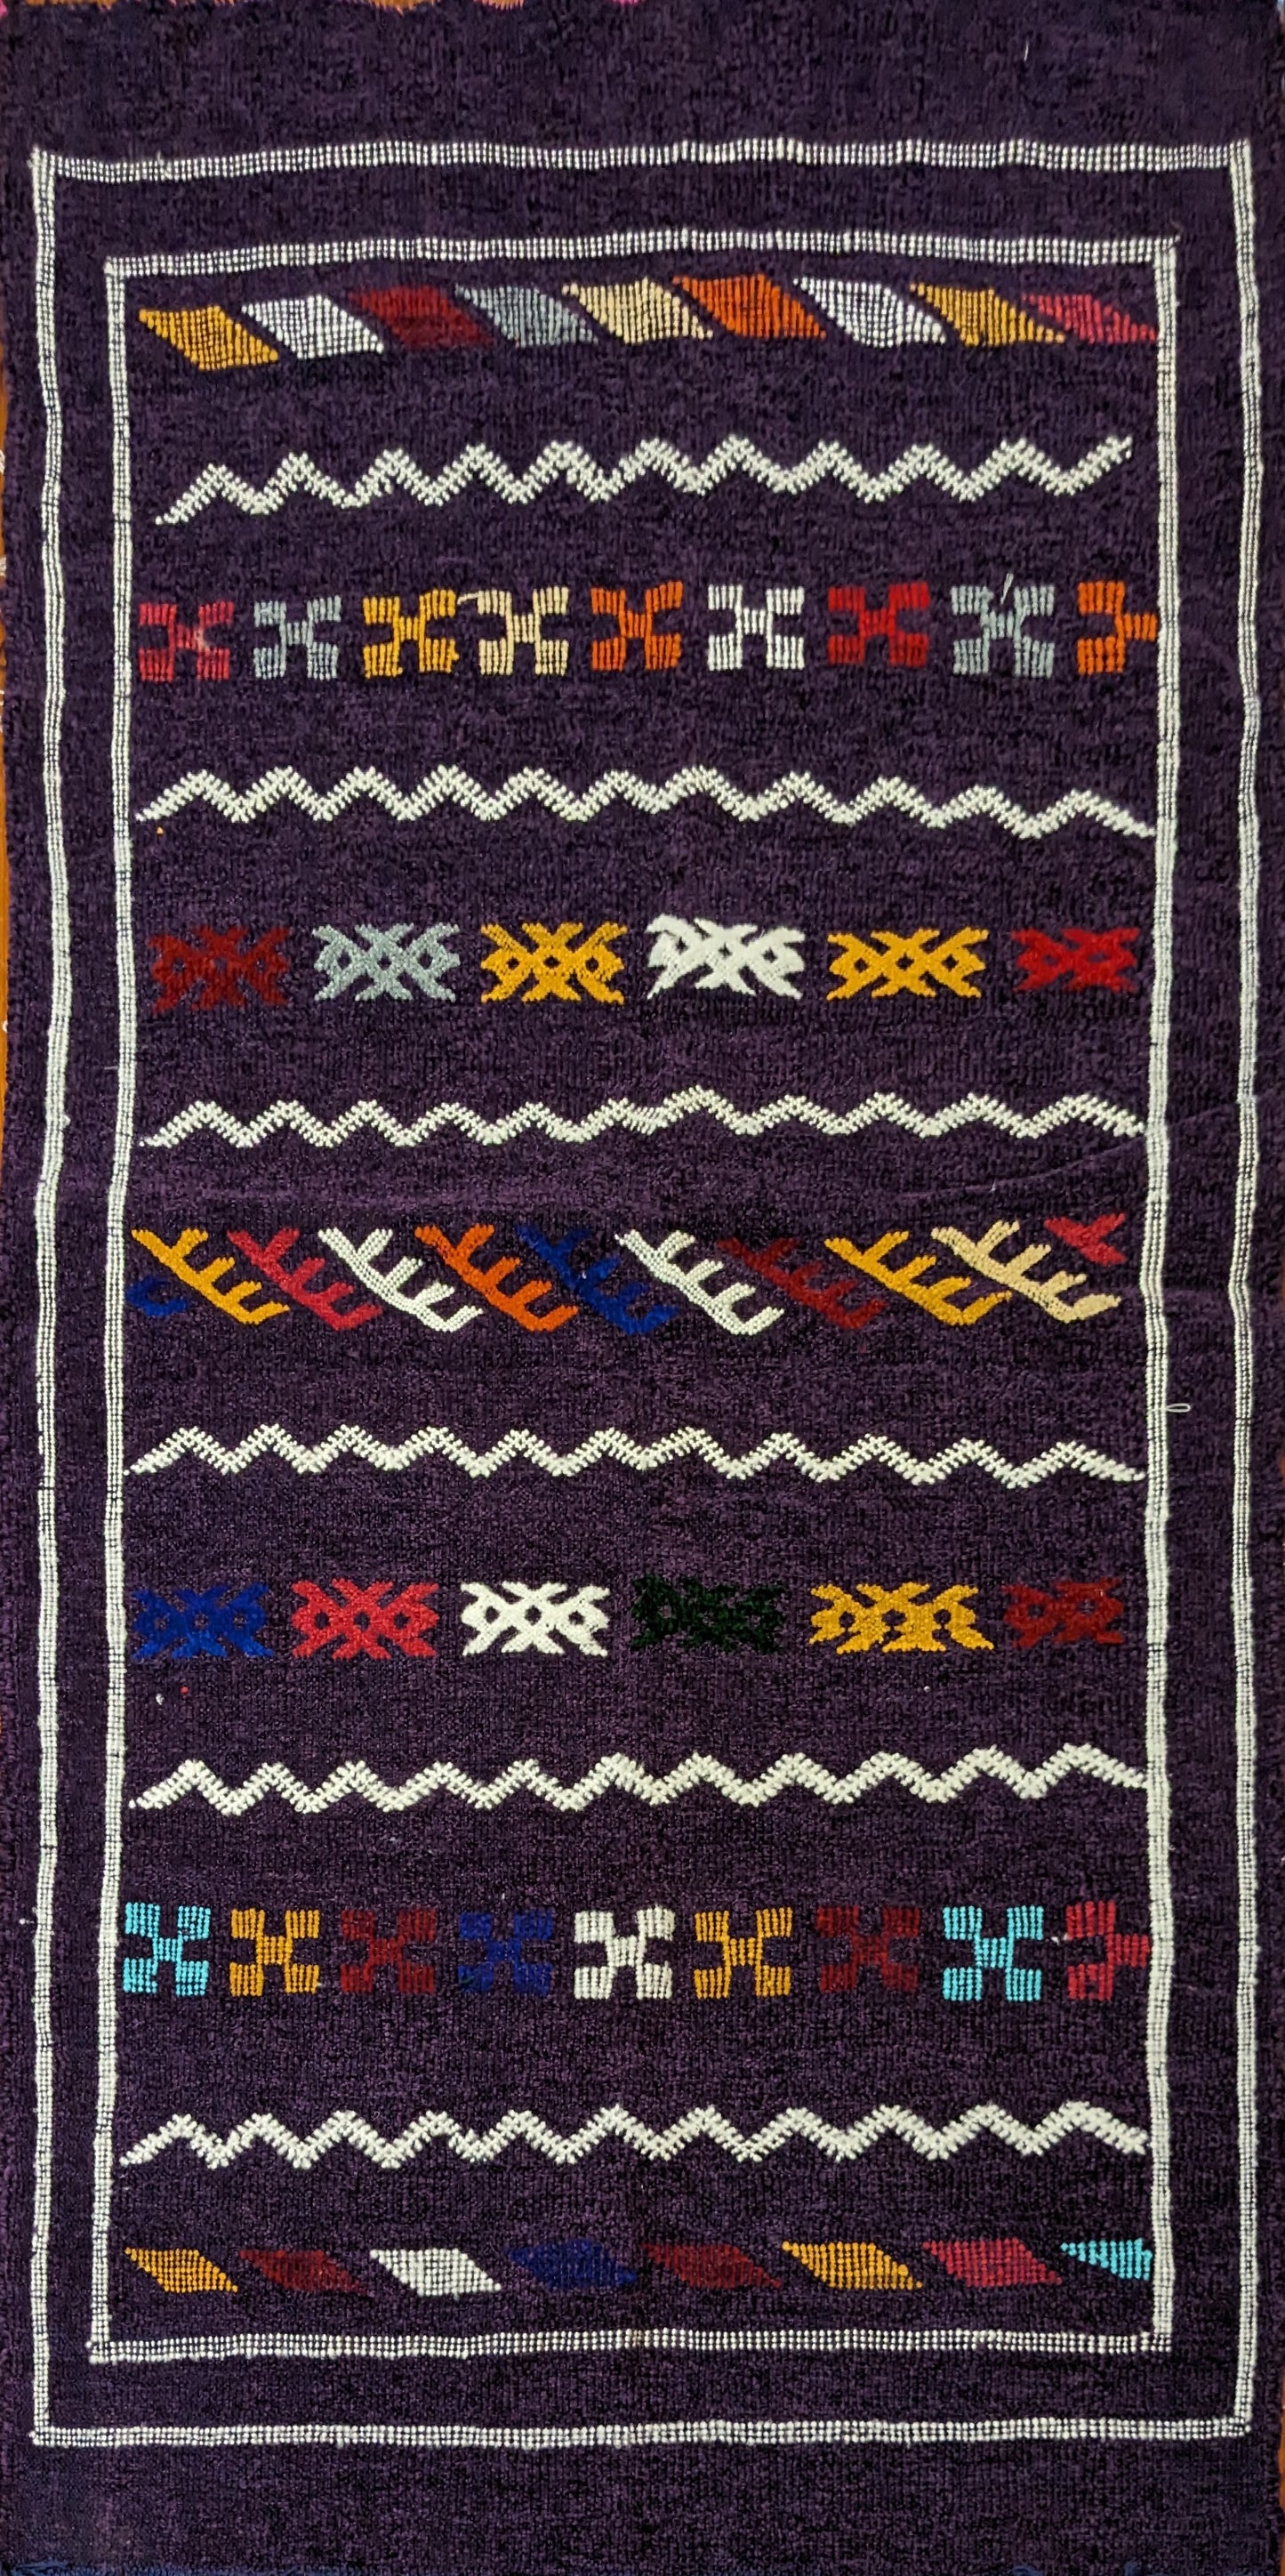 A Purple Rug with Berber Patterns